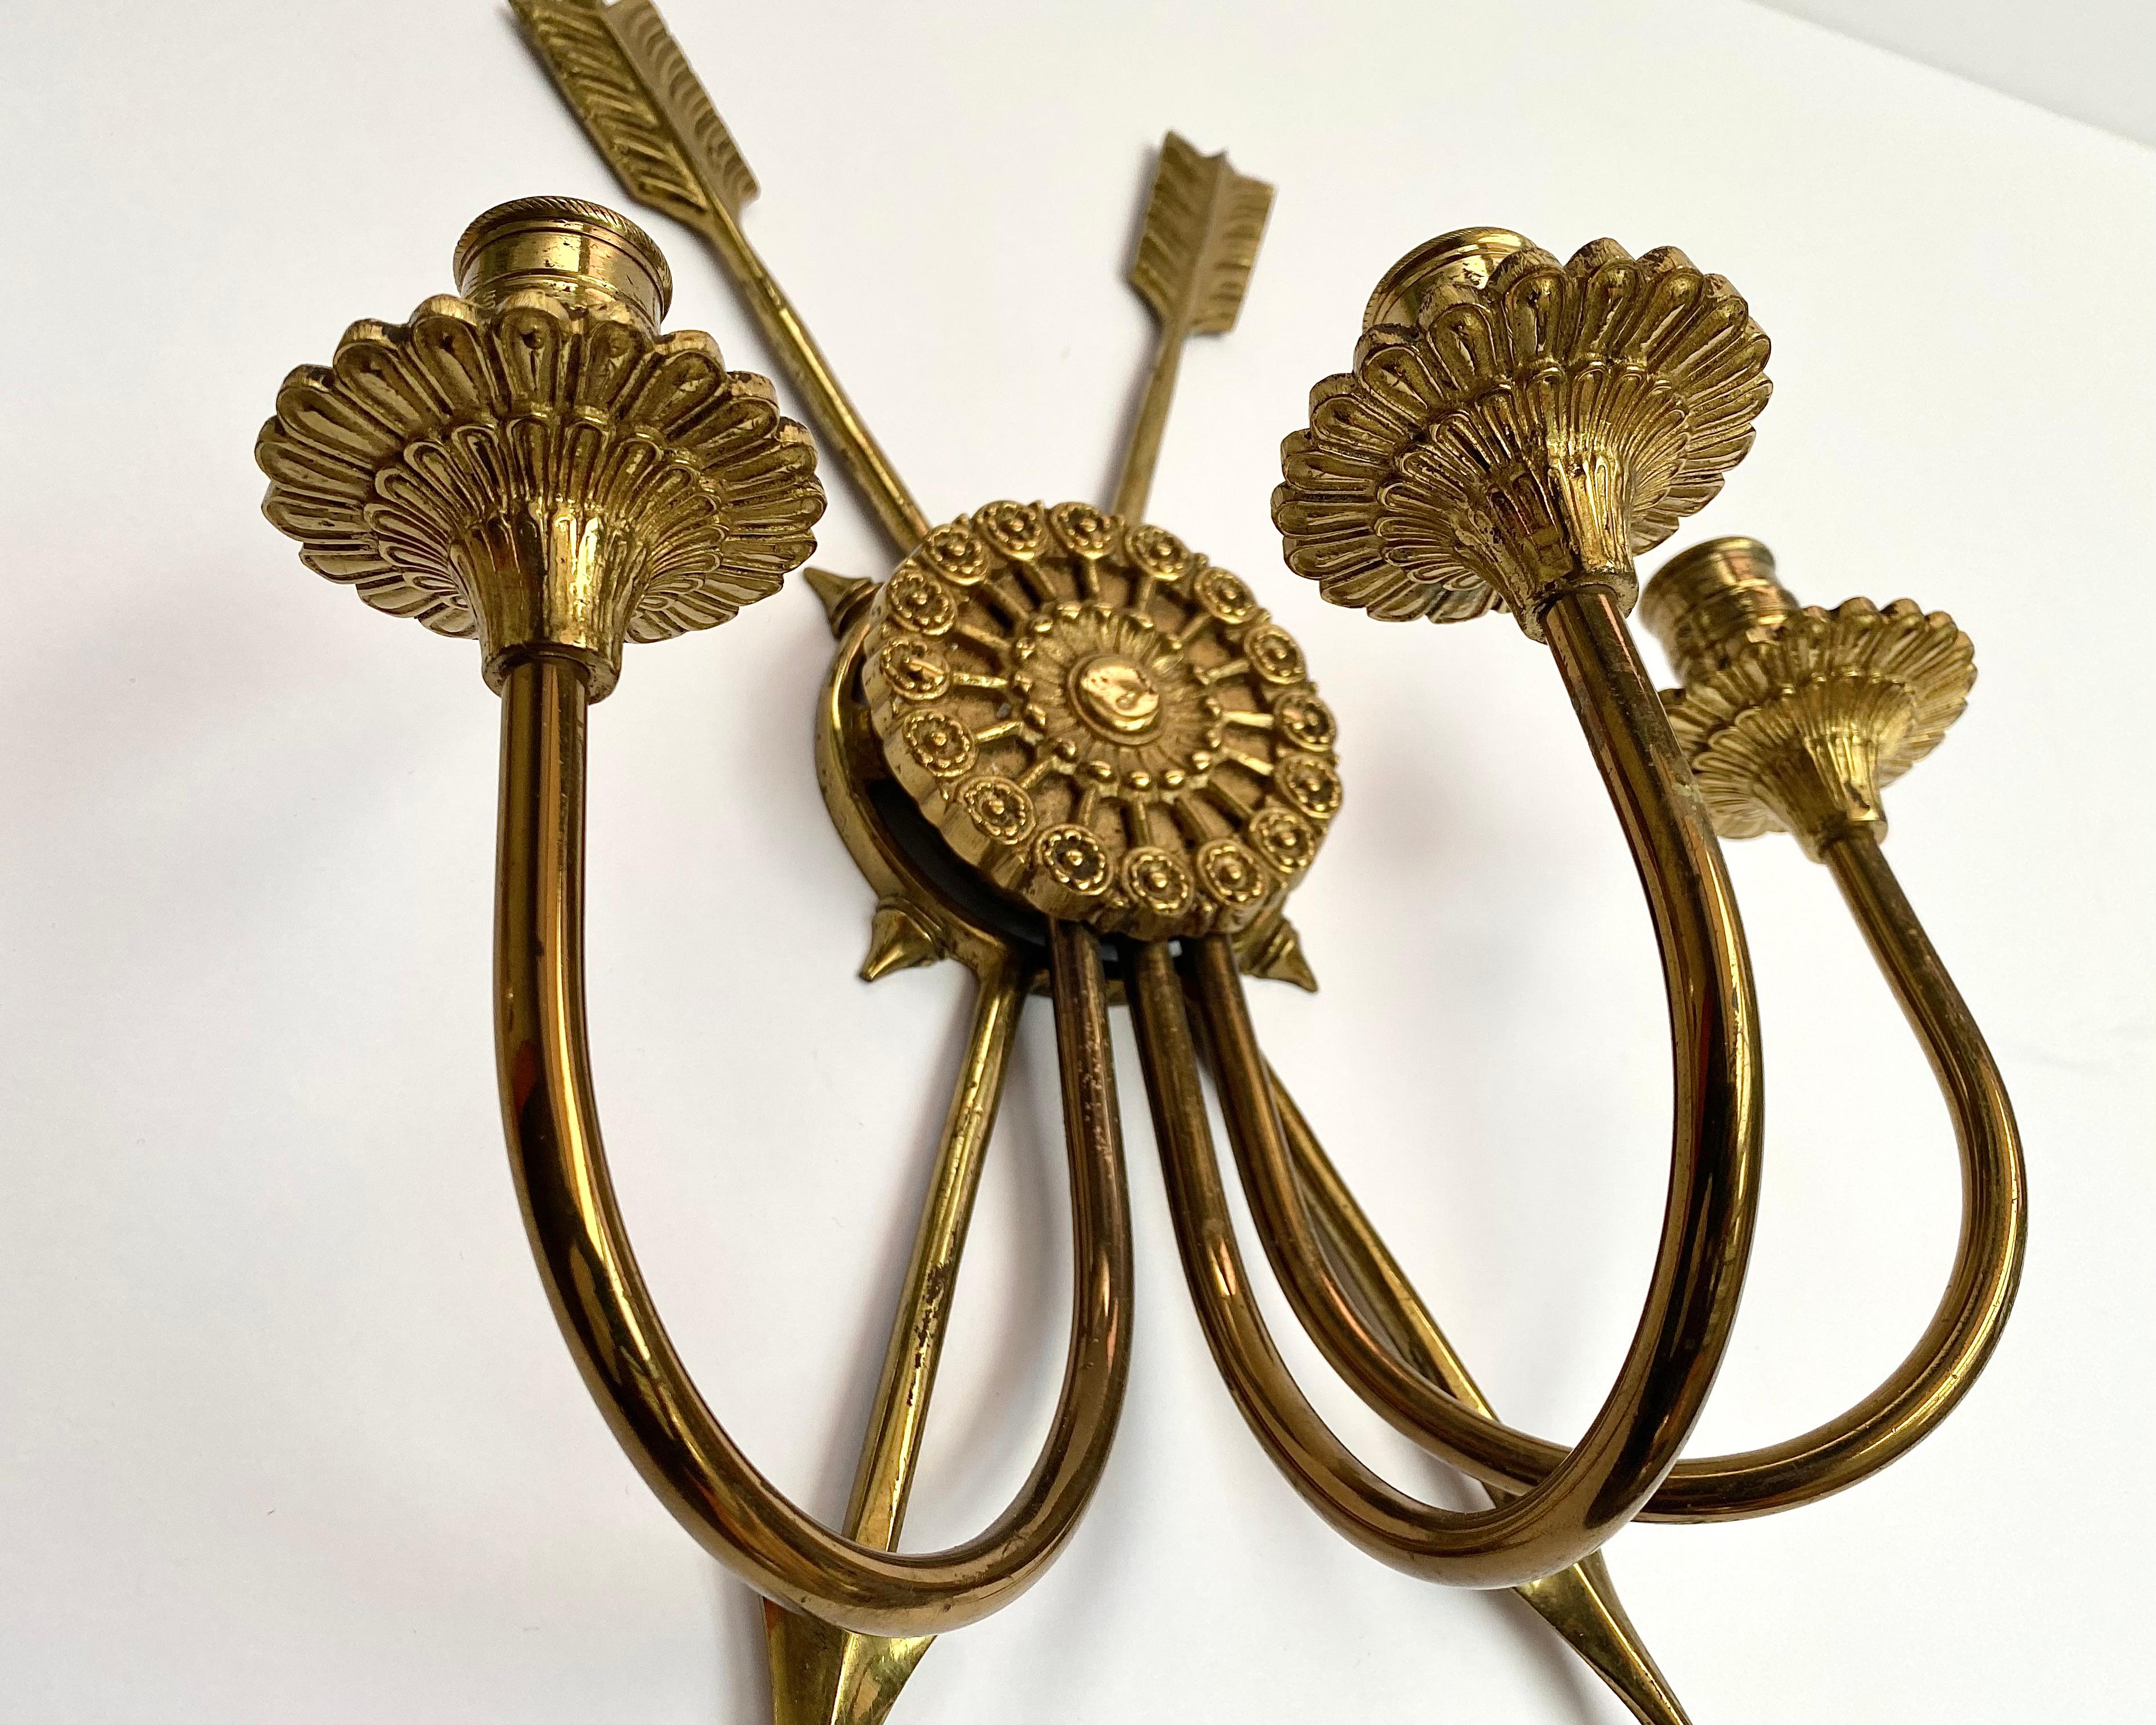 Elegant French Empire style two-arm gilt bronze sconce with two arrows on body and round backplate, early 20th Century.

The candelabra will become the highlight of your interior; they will add an atmosphere of romance and mystery.

Luxurious